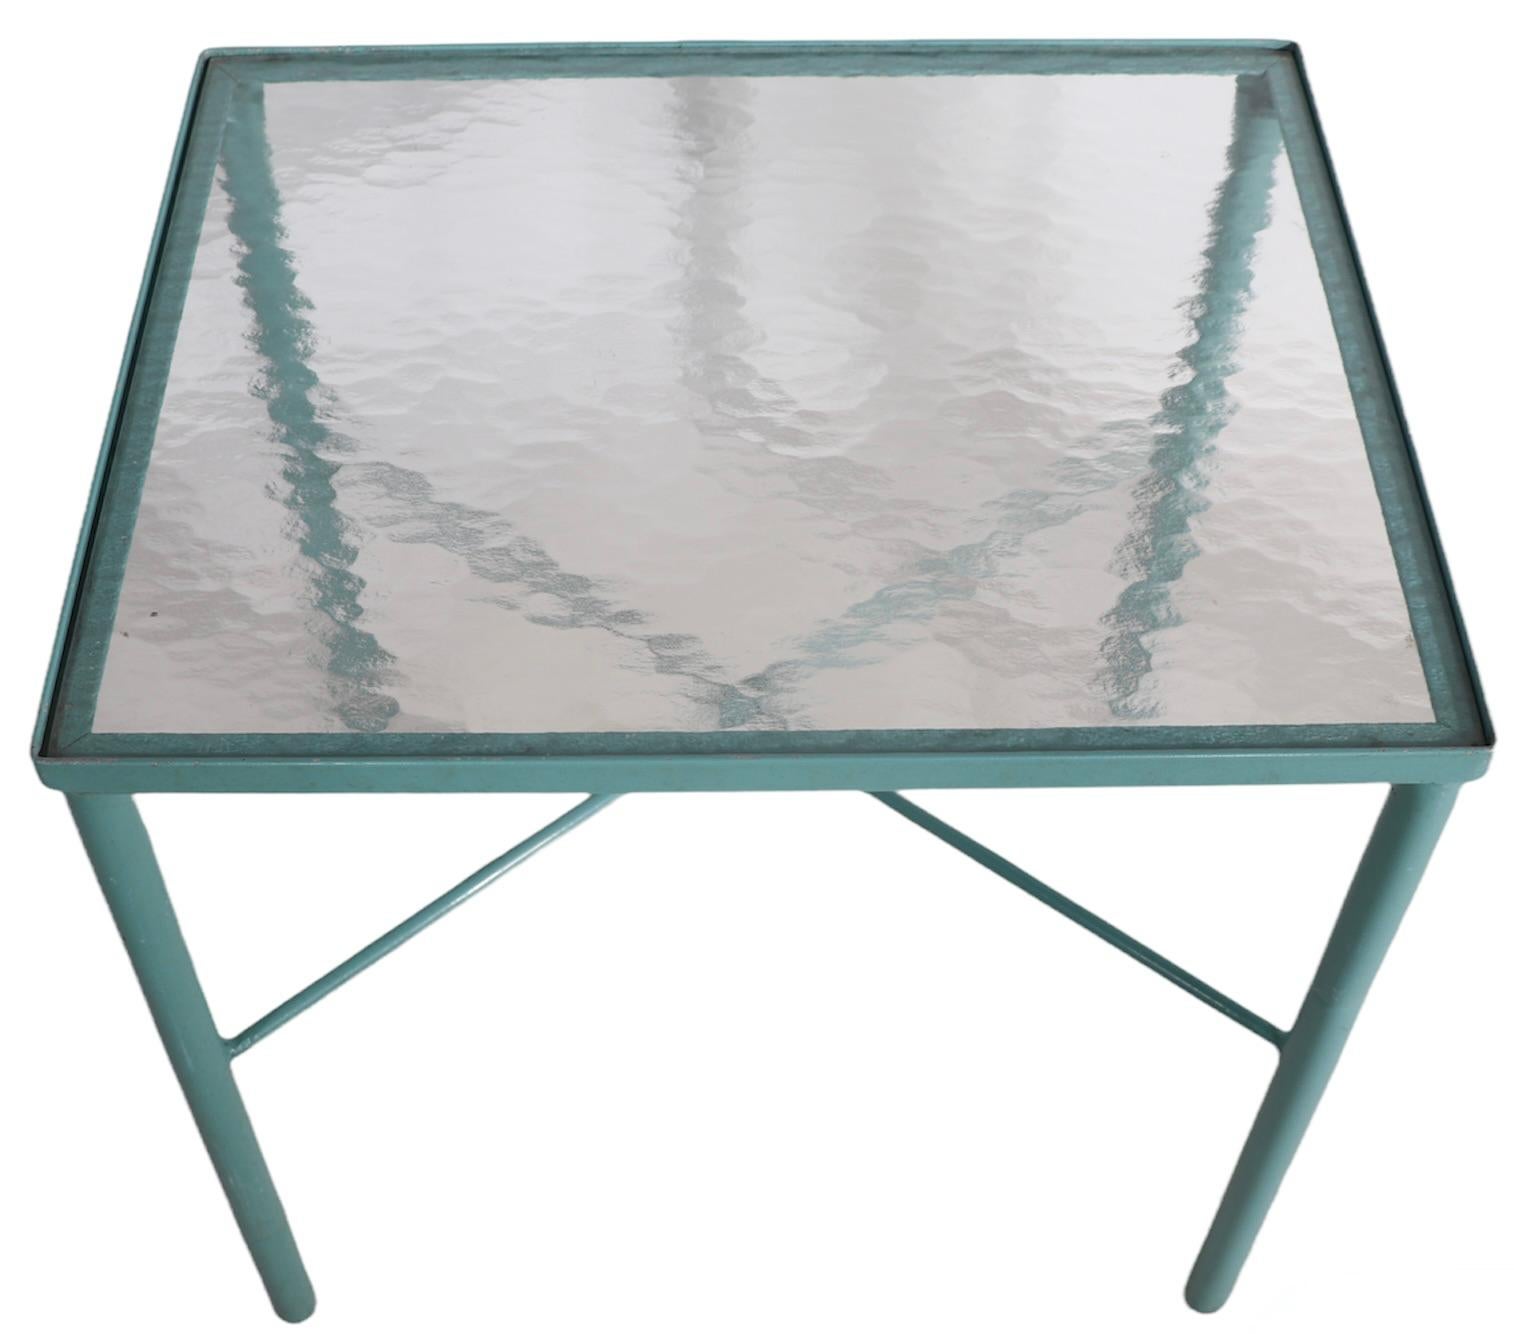 Mid-Century Modern Garden Patio Poolside Table by Hauser Made in USA Ca. 1970's After Brown Jordan For Sale